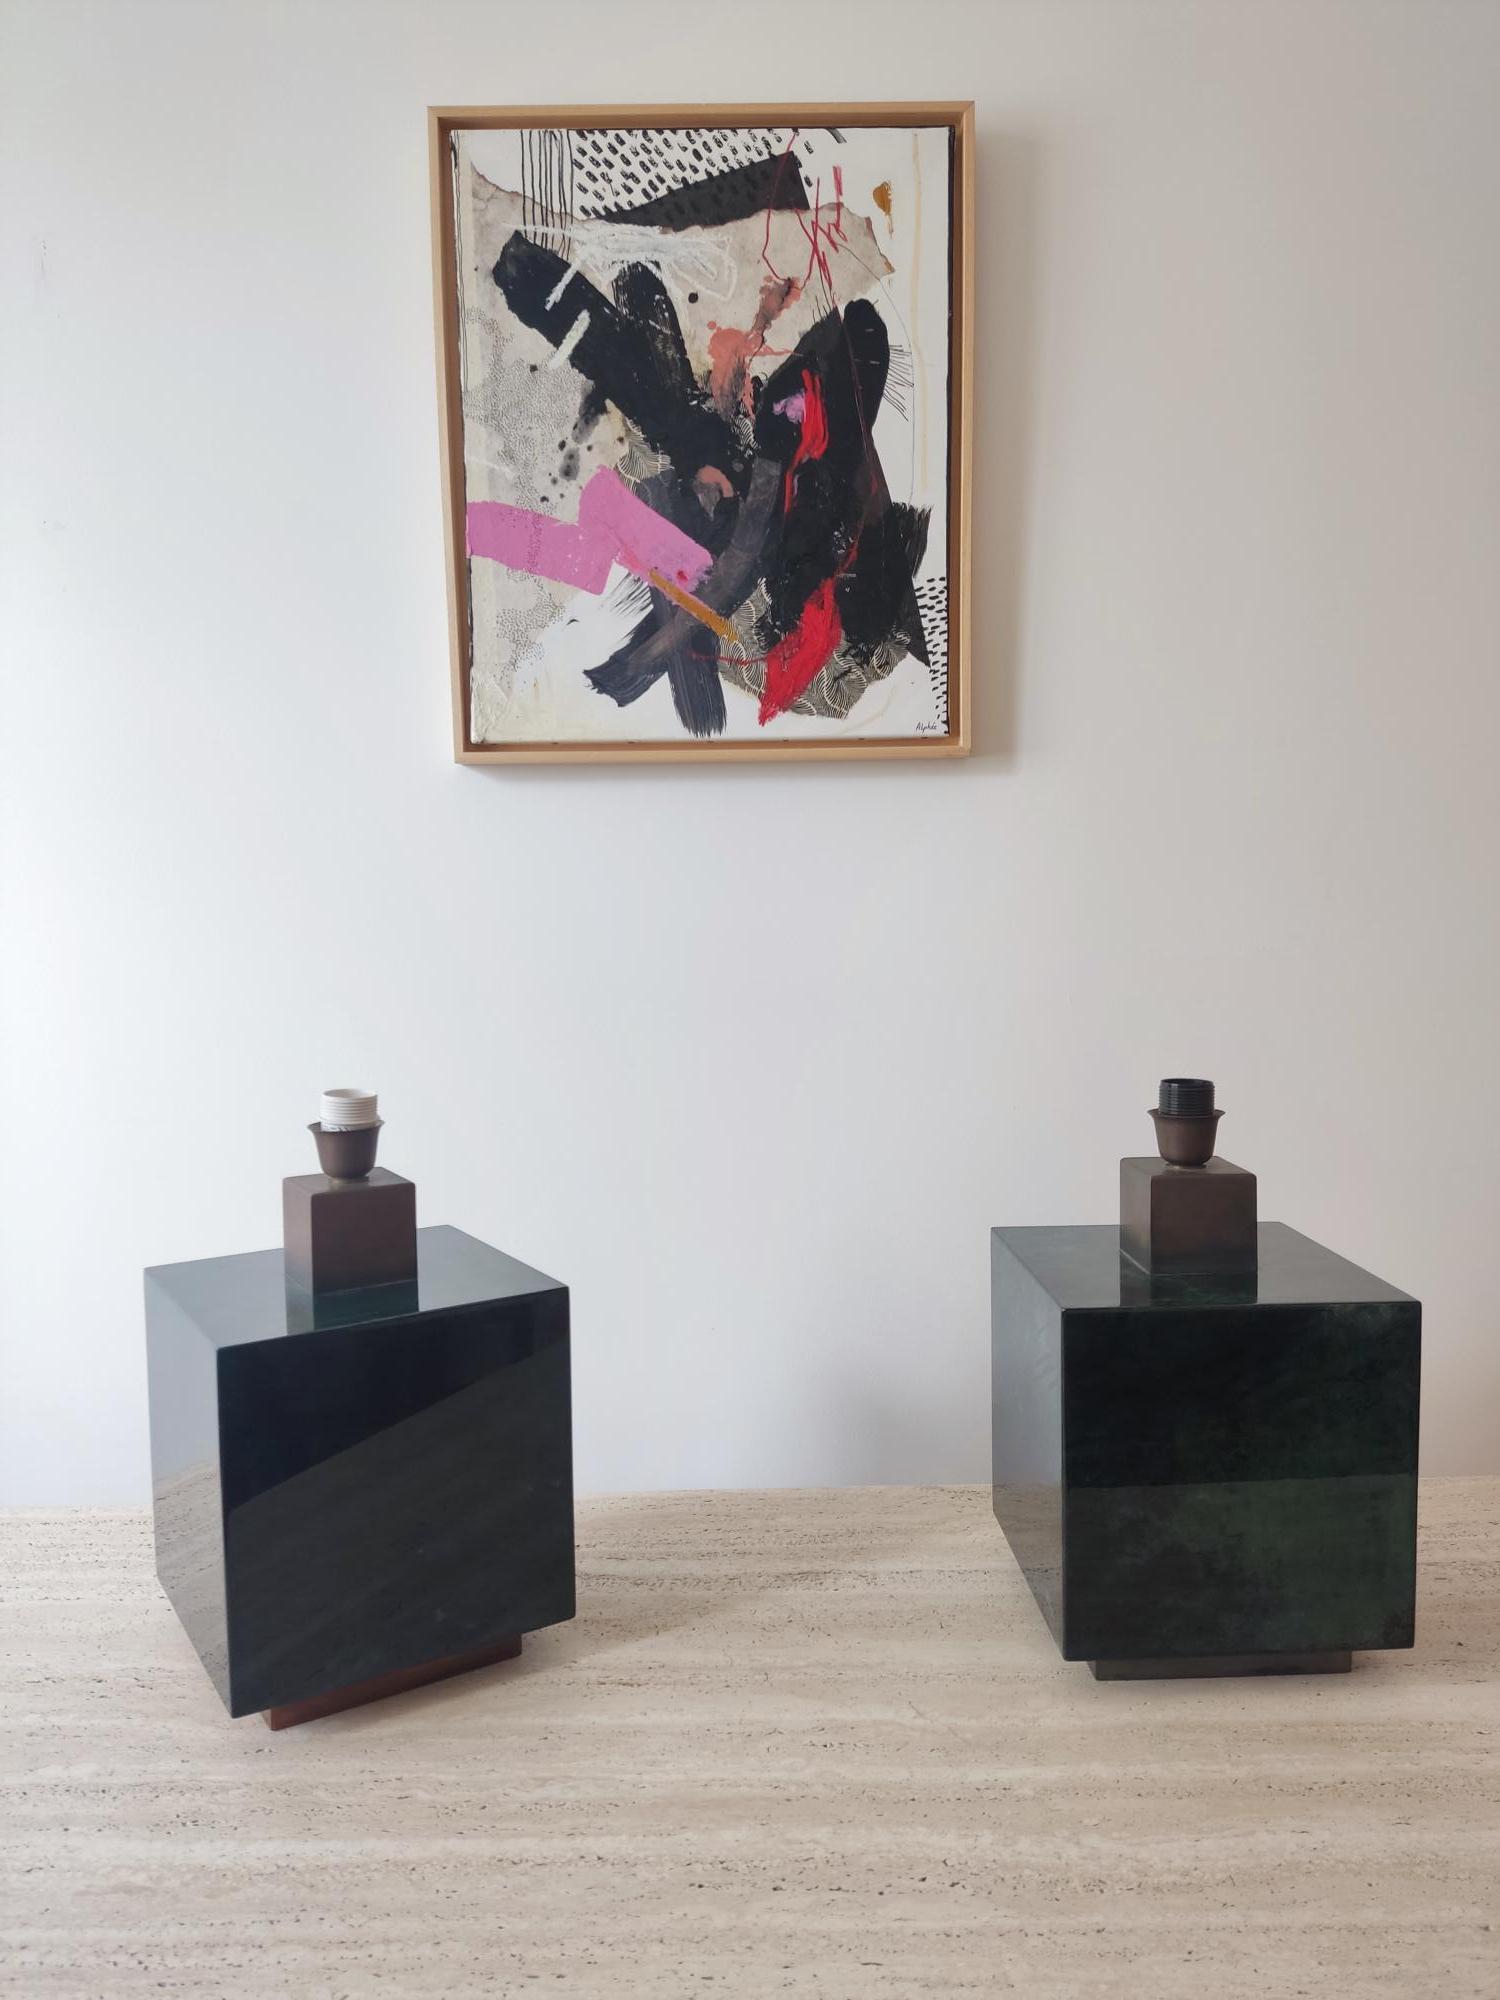 Elegant pair of Italian lamps from the 1960s attributed to Aldo Tura. The body, square in shape, is lacquered in a gradient of greens. It rests on a brass base found at the head. The lampshades are new.

